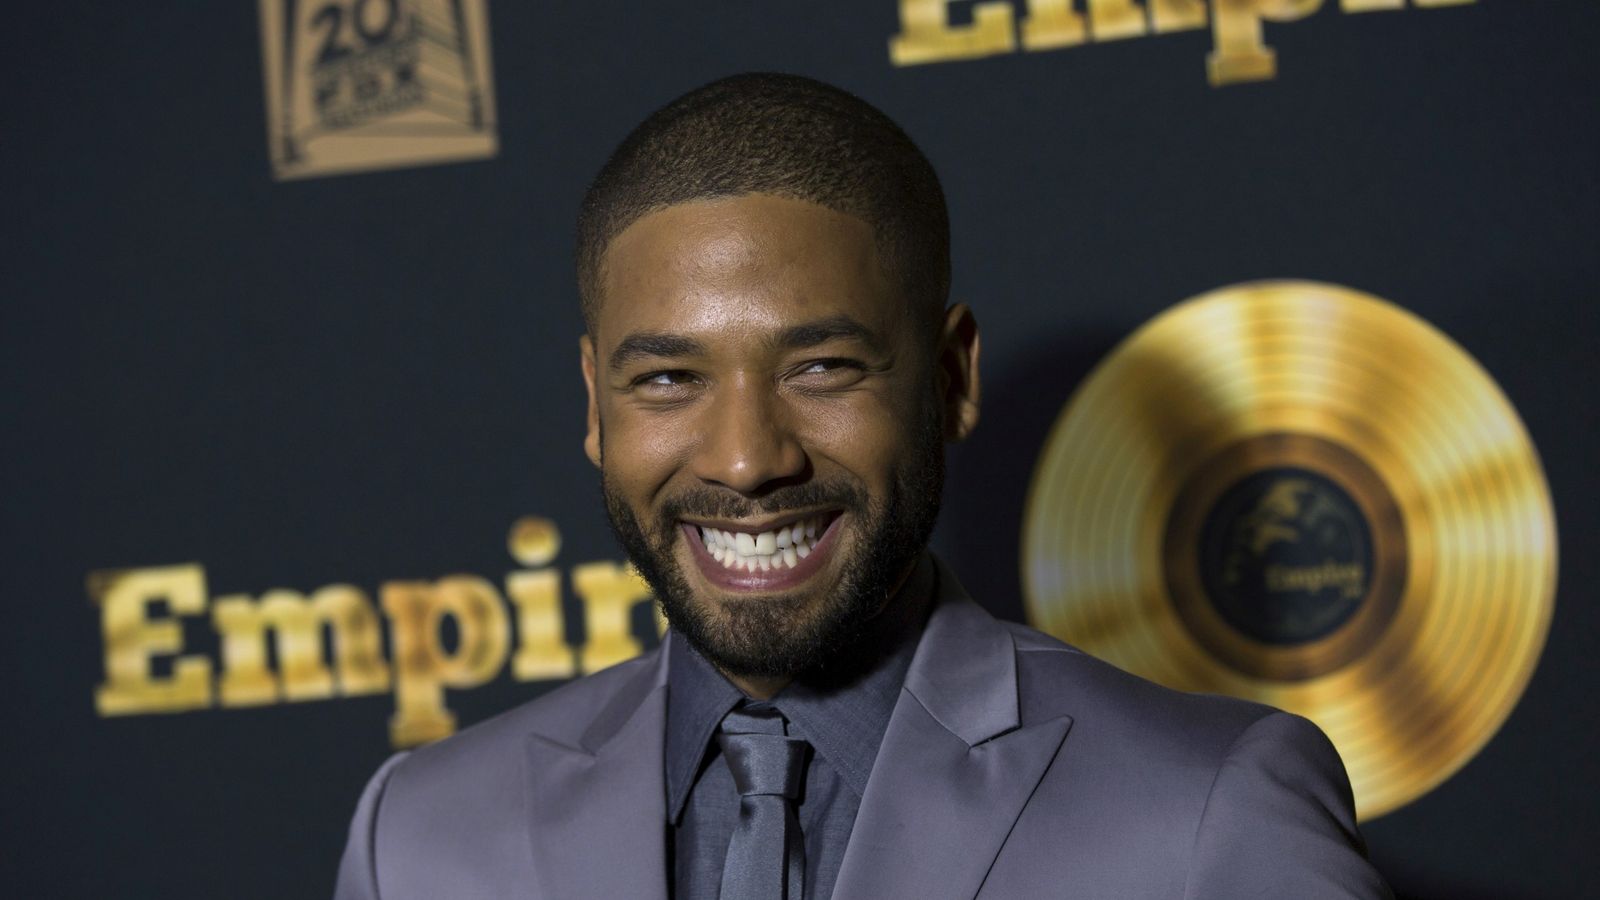 Empire actor Jussie Smollett accused of faking own homophobic attack | US News | Sky News